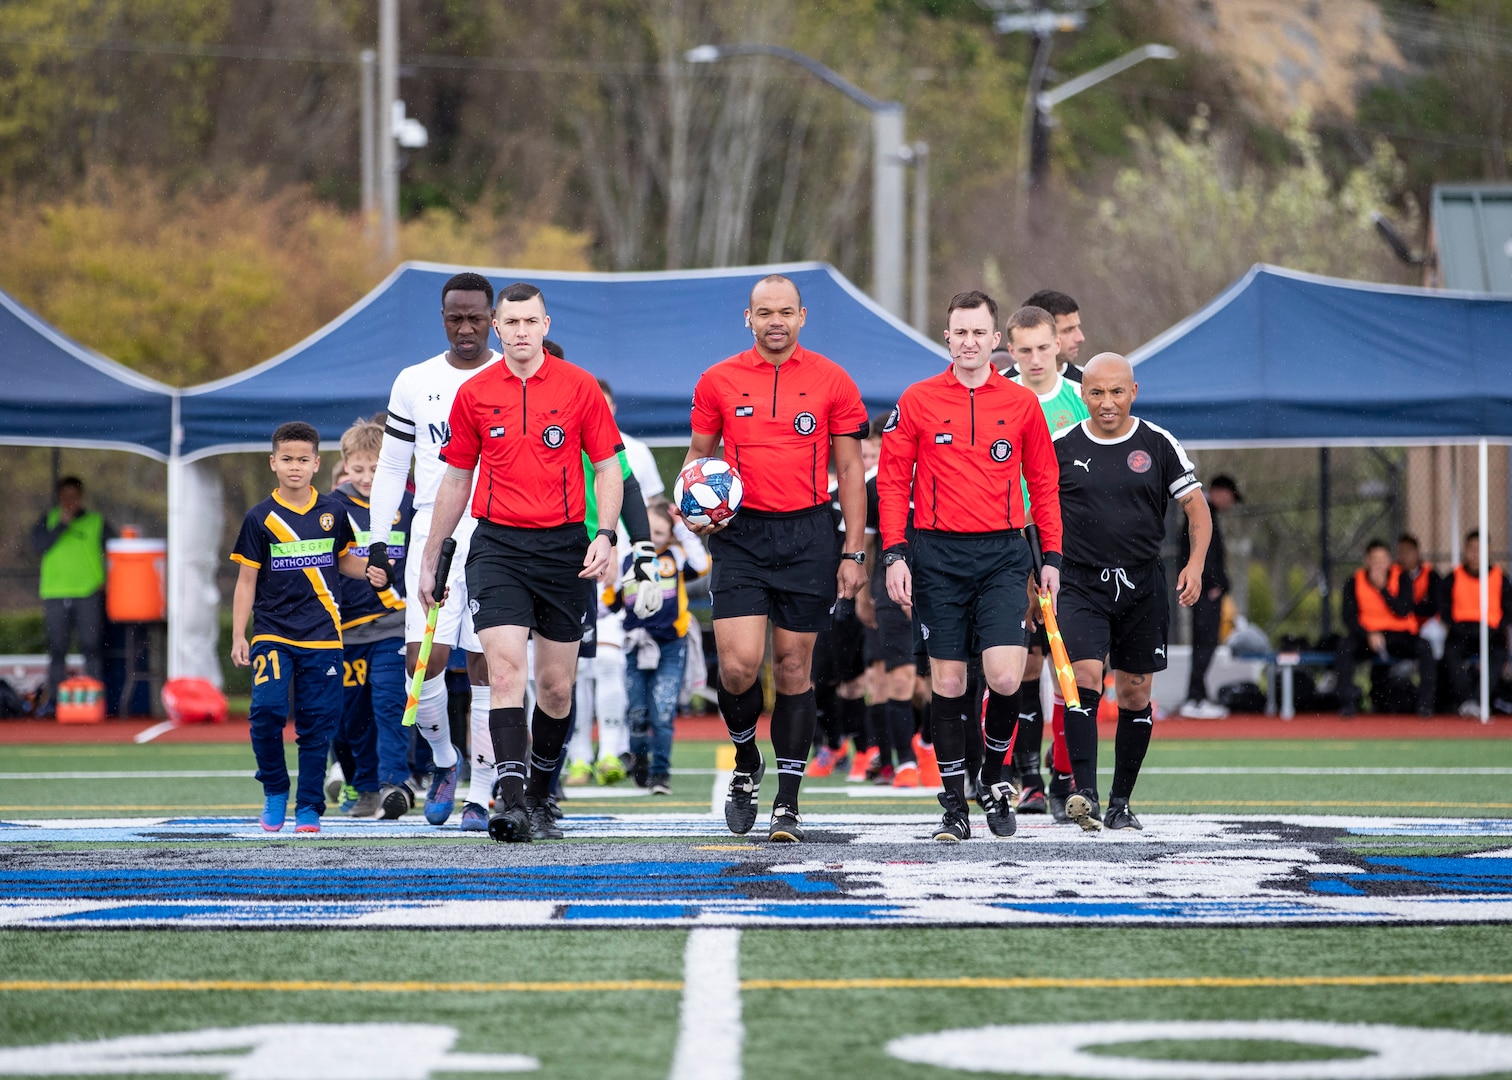 NAVAL STATION EVERETT, Wa. (April 14, 2019) - Navy and Marein Corp. soccer teams head on to the field for day one of the 2019 Armed Forces Men's Soccer Championship hosted at Naval Station Everett, Wa. from 14-20 April, featuring Service members from the Army, Marine Corps, Navy (including Coast Guard) and Air Force. (U.S. Navy Photo by Mass Communicaton Specialist 2nd Class Ian Carver/RELEASED).